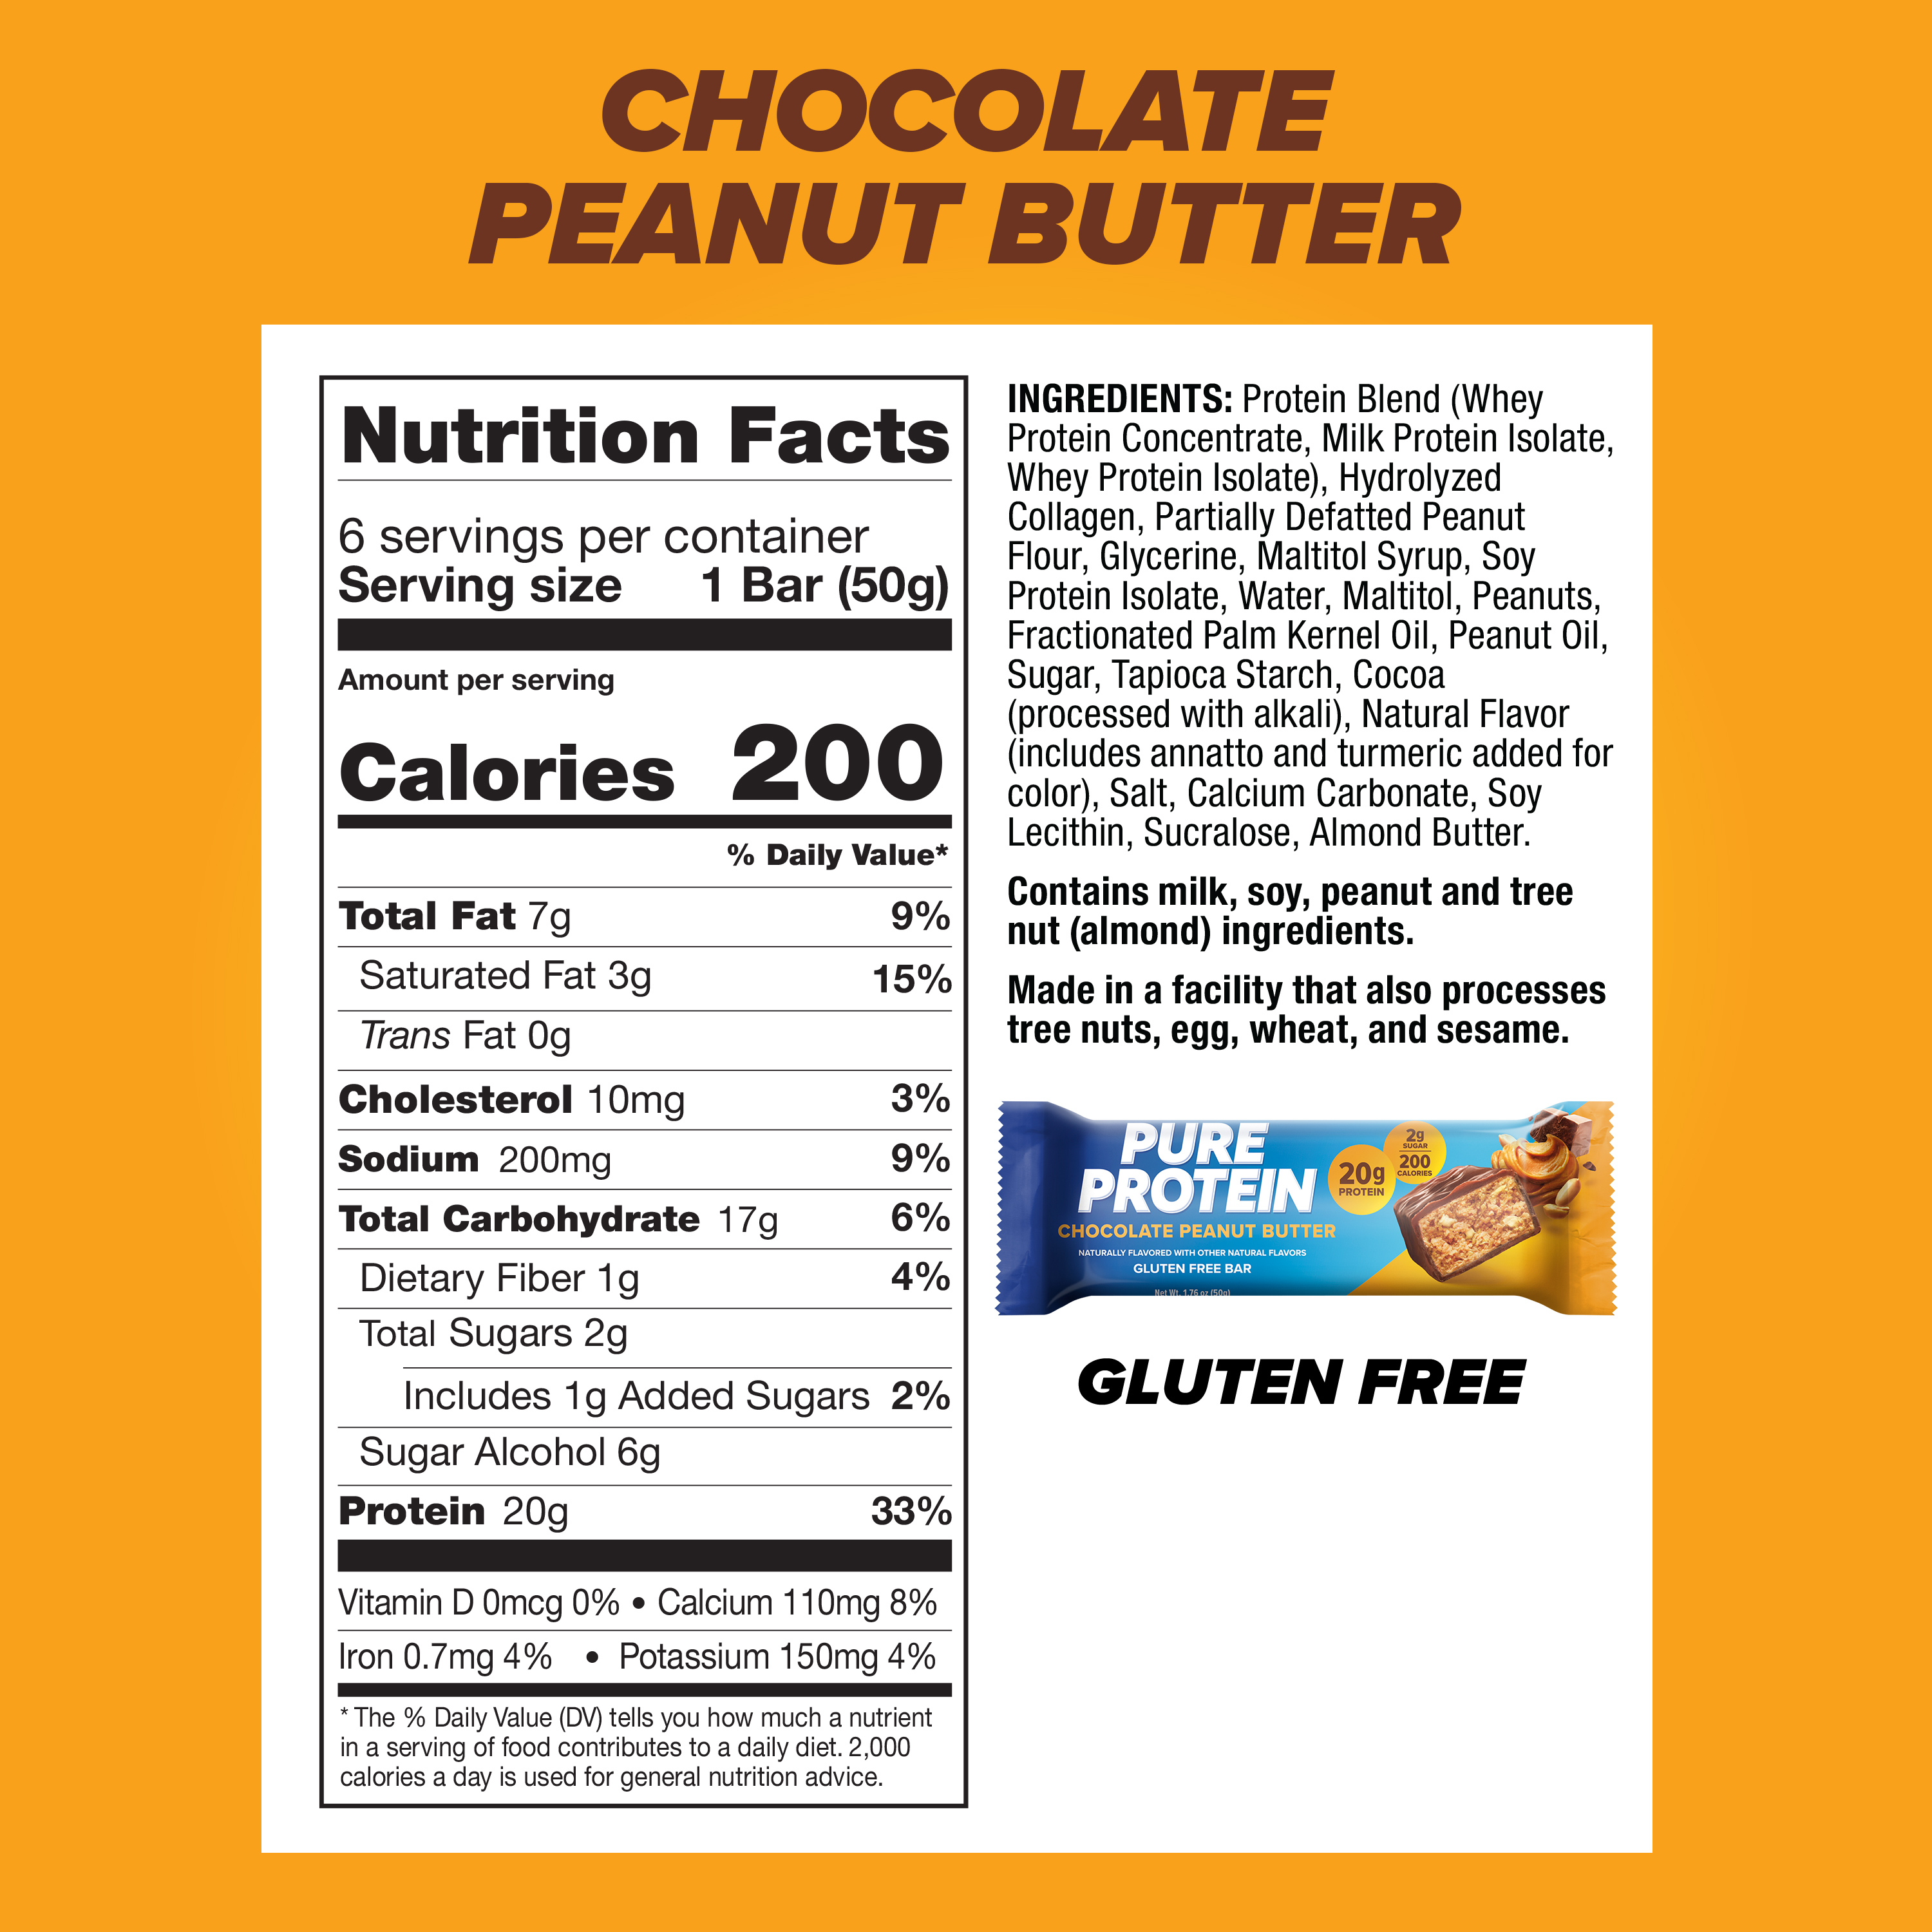 Pure Protein Bars, Chocolate Peanut Butter, 20g Protein, Gluten Free, 1.76 oz, 6 Ct - image 2 of 6